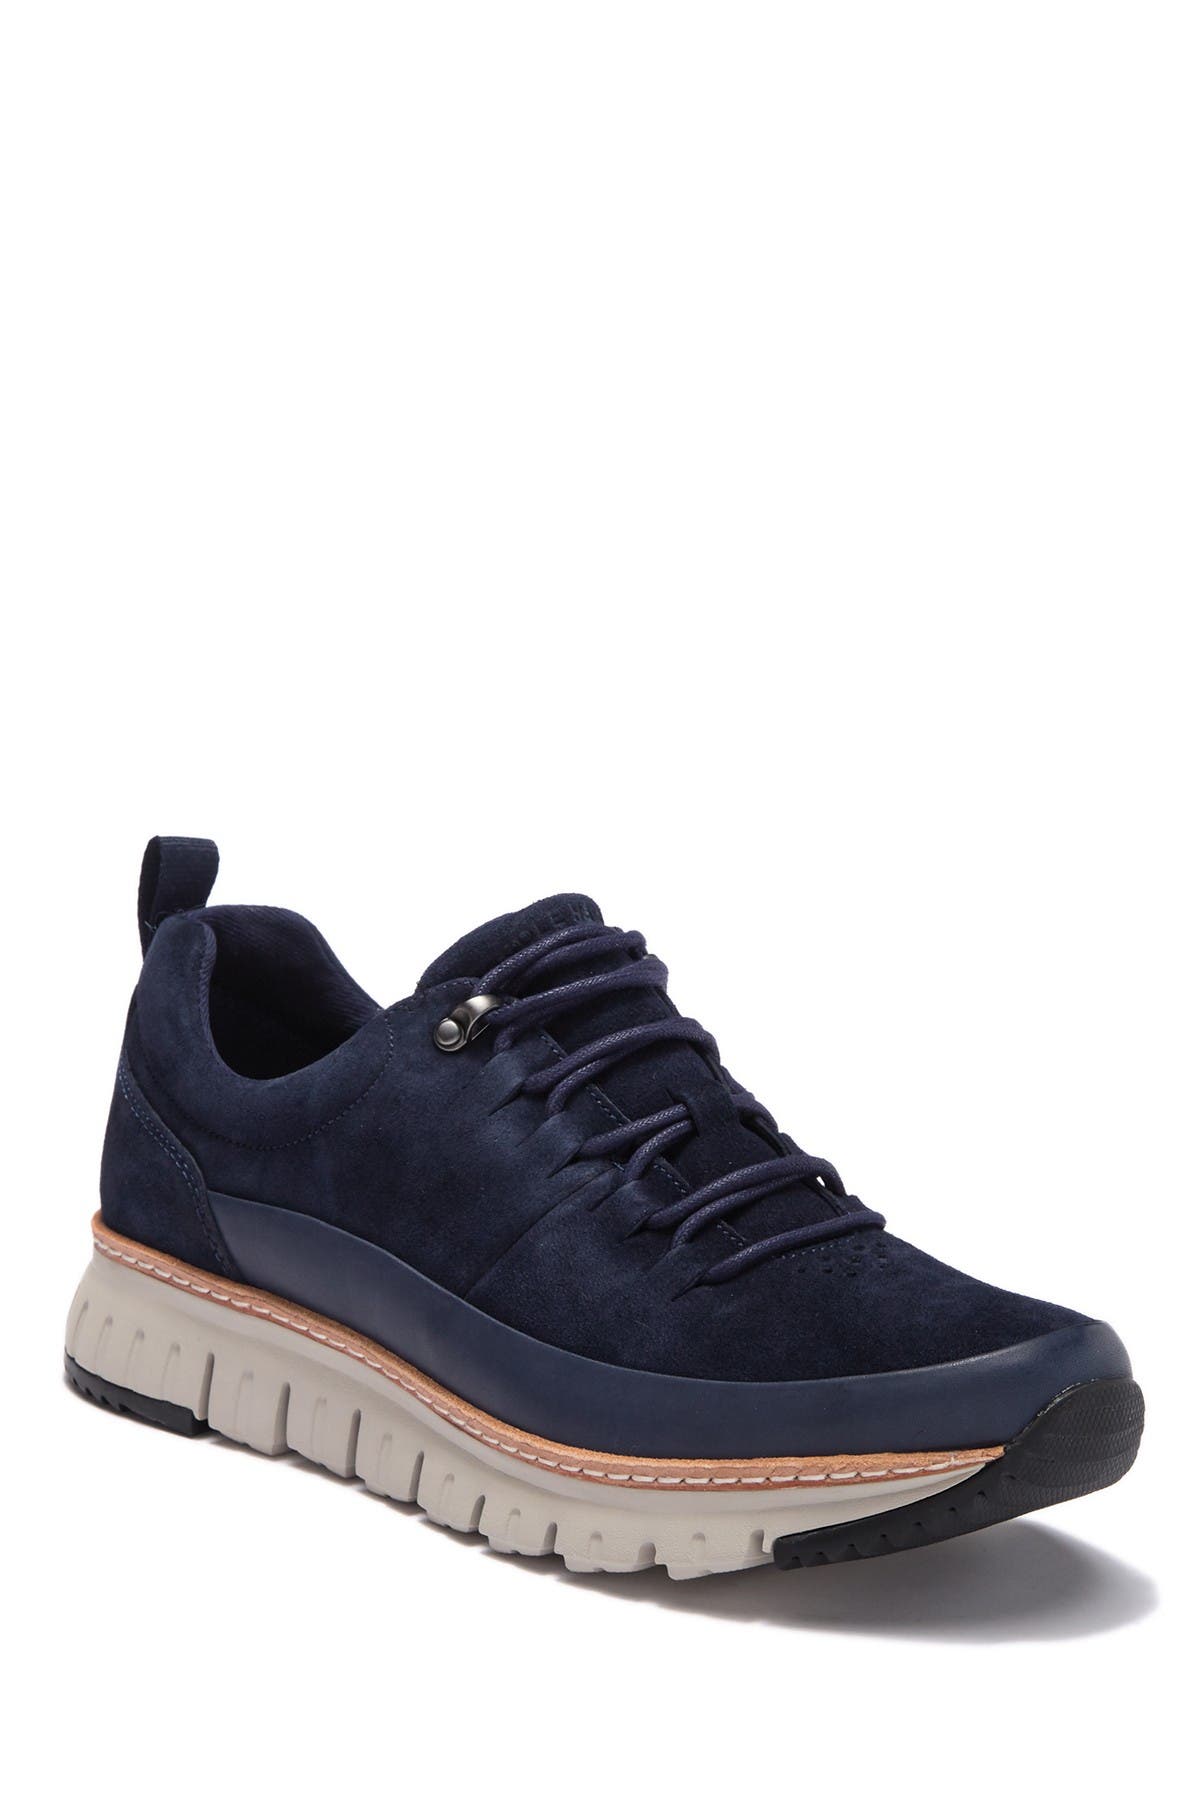 Cole Haan | Zerogrand Suede Leather 